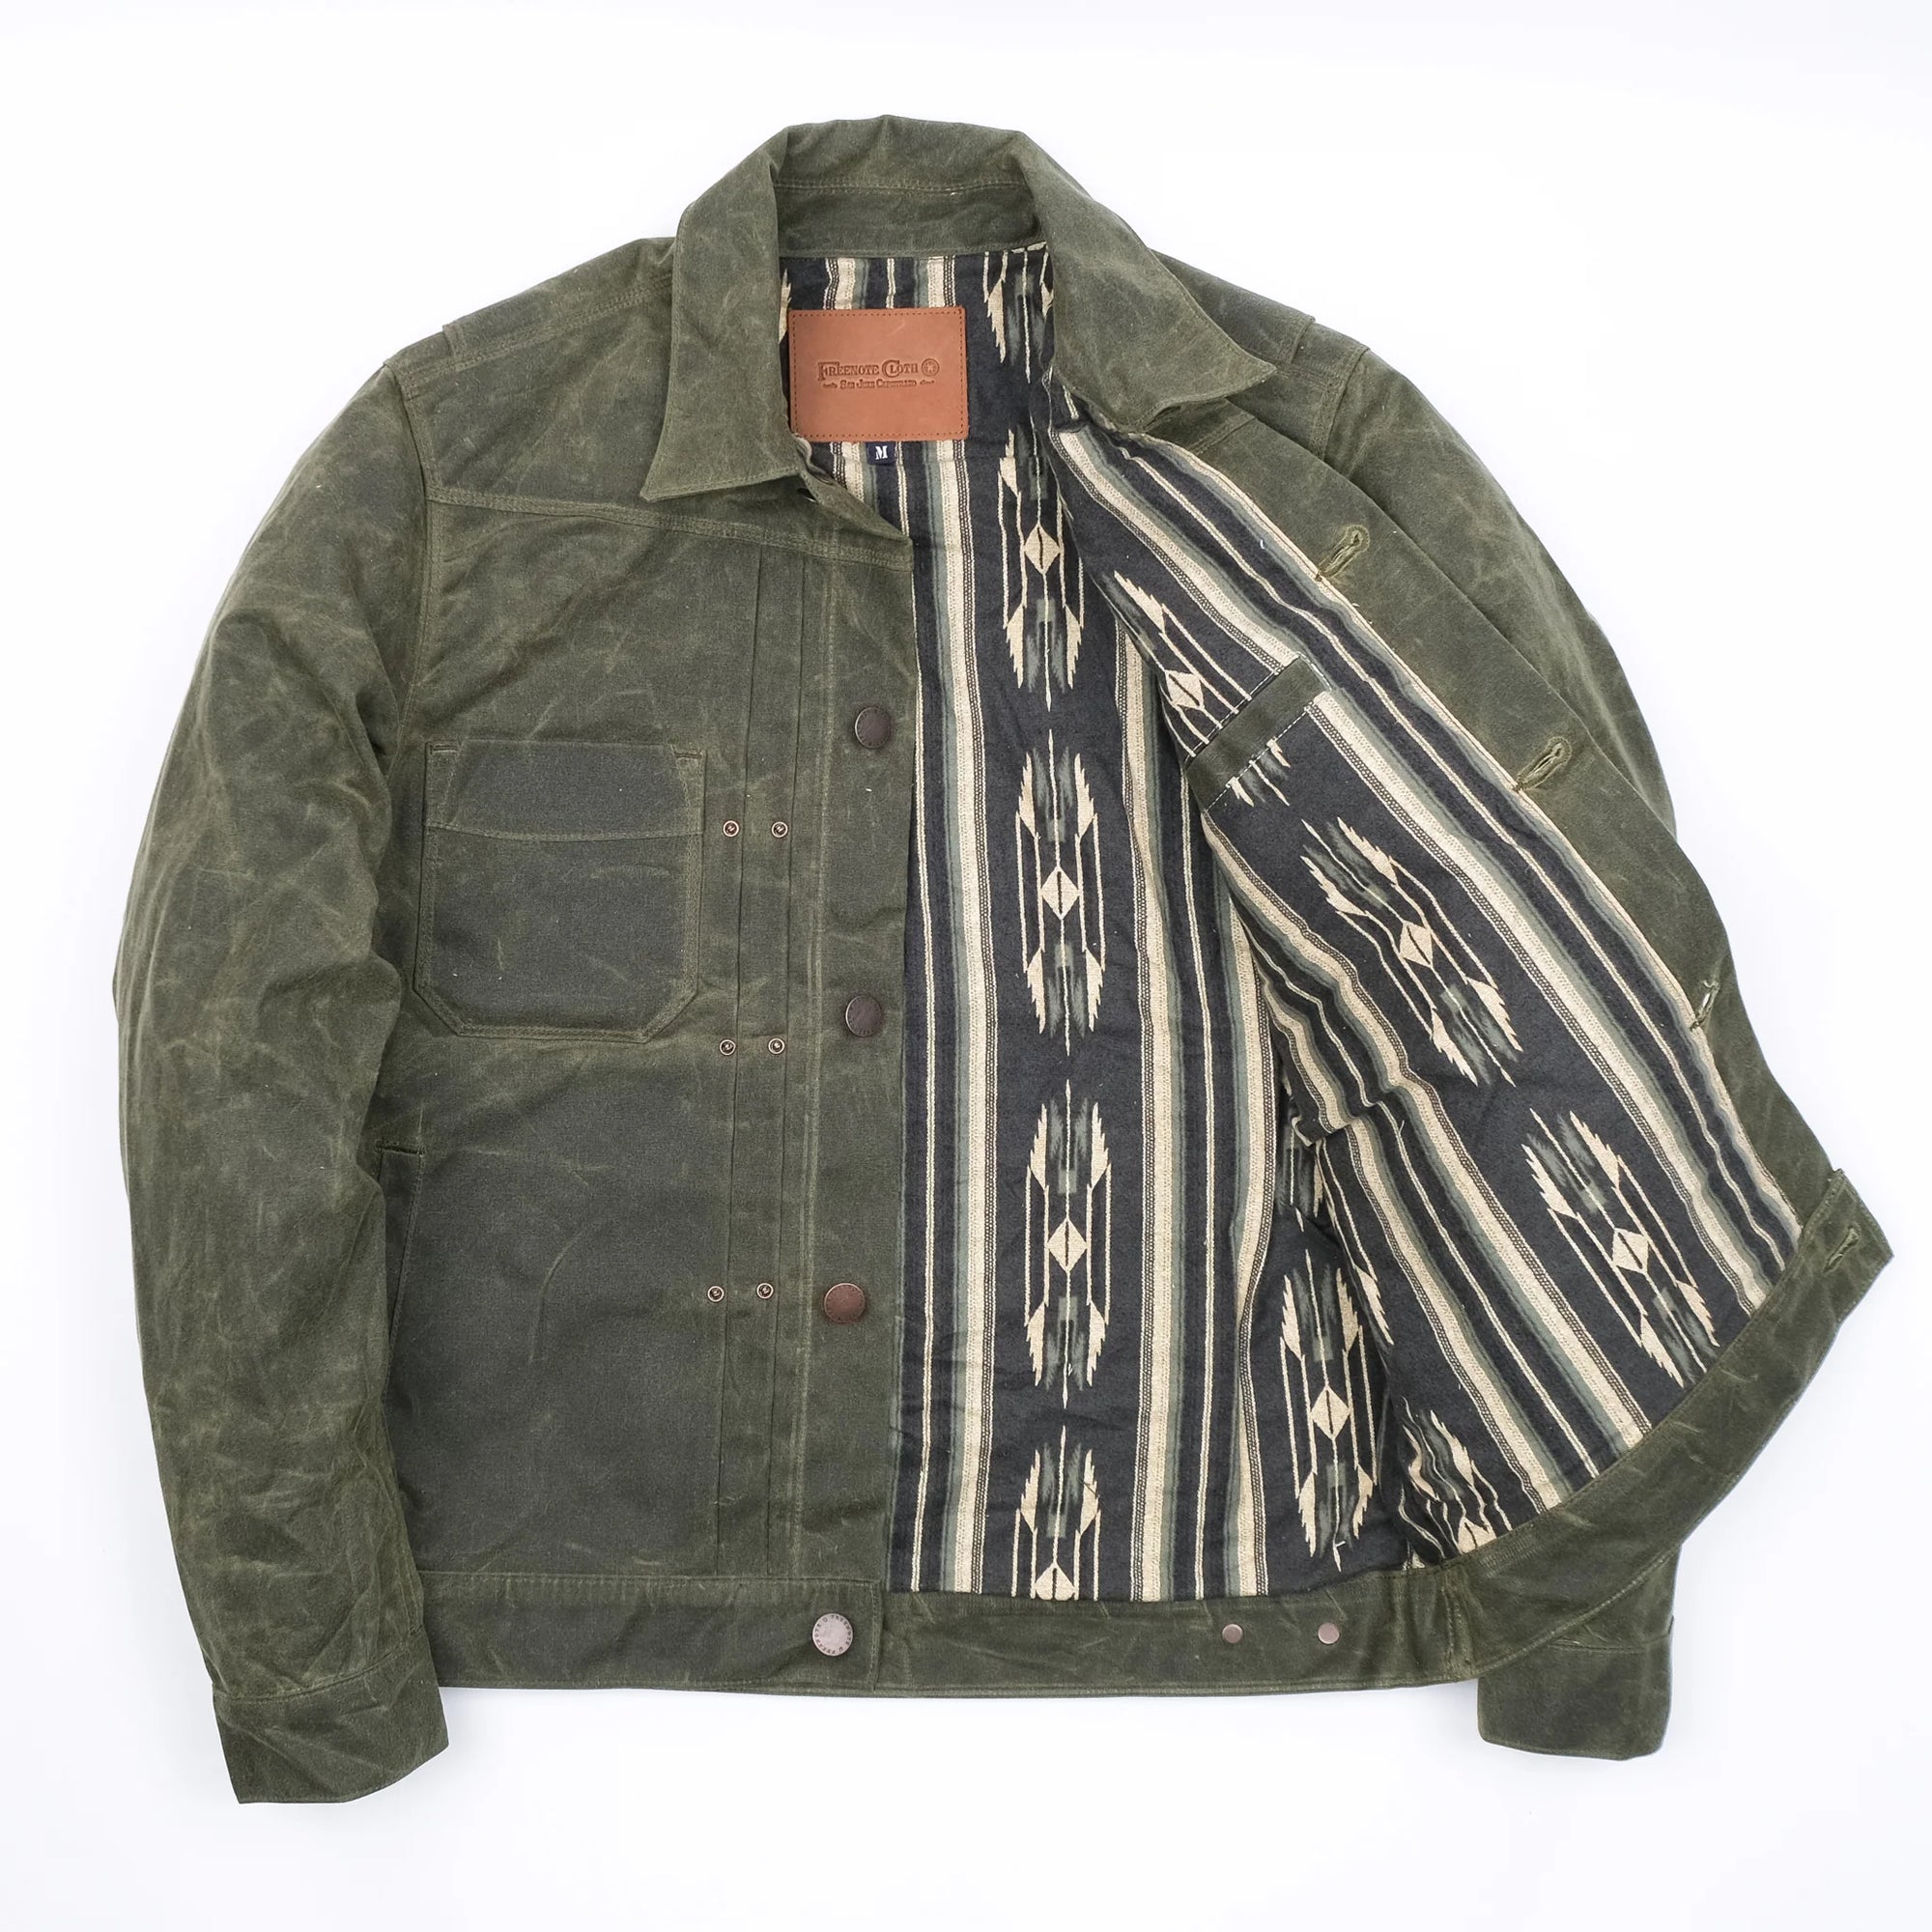 Freenote Cloth Riders Jacket in Olive Waxed Canvas